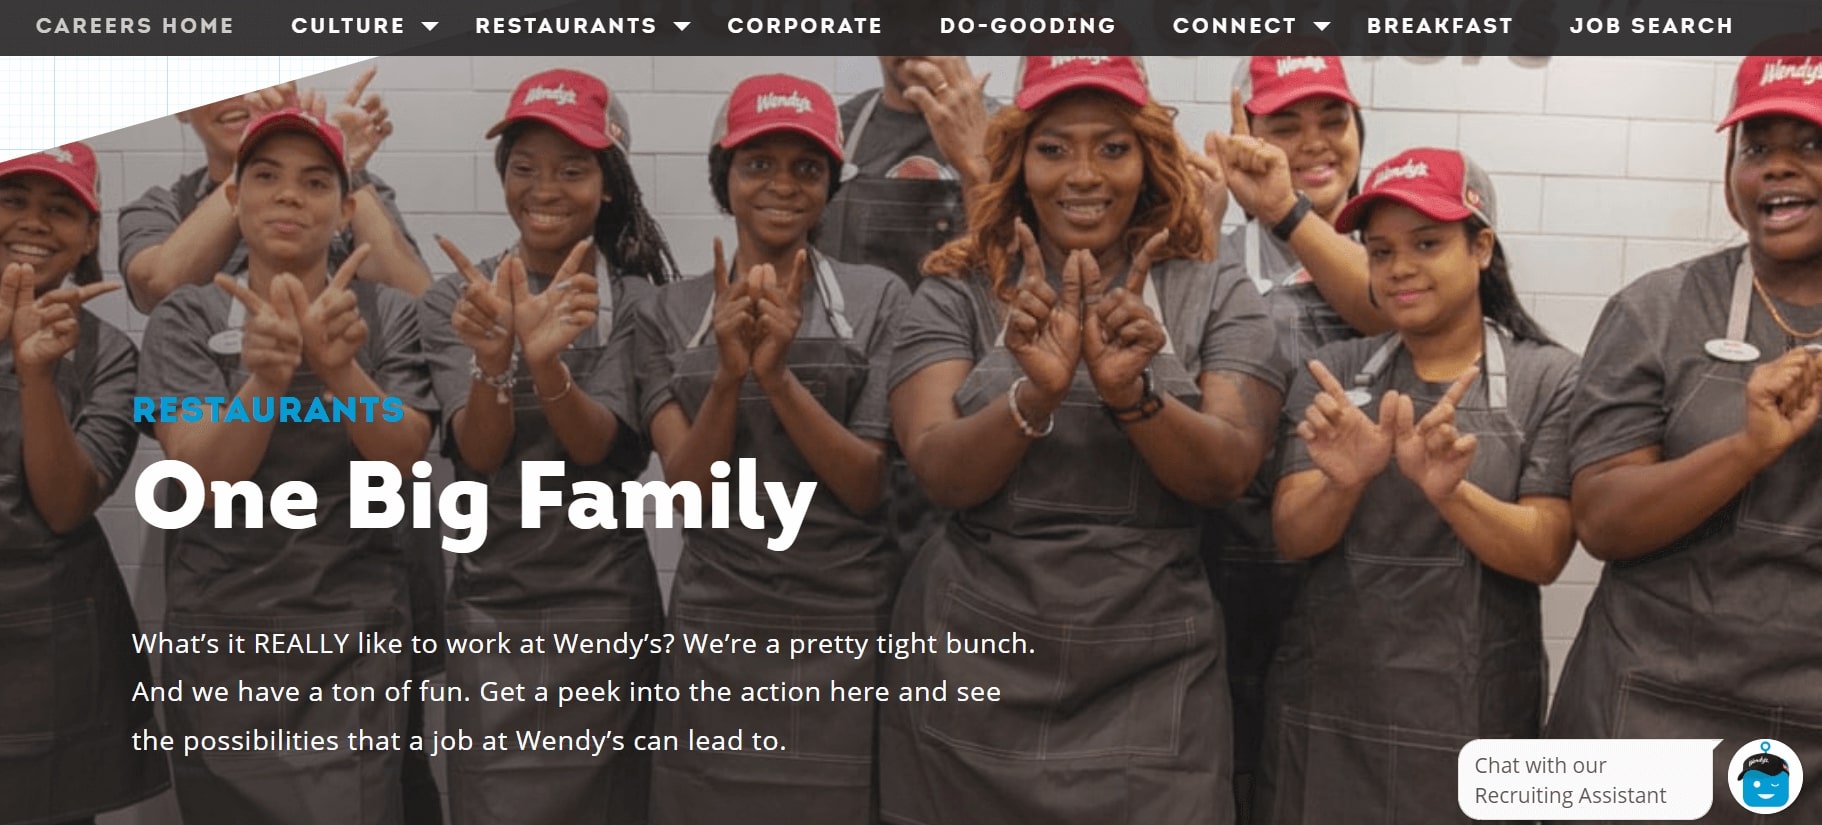 Wendy's corporate culture: Learn it to ace your interview